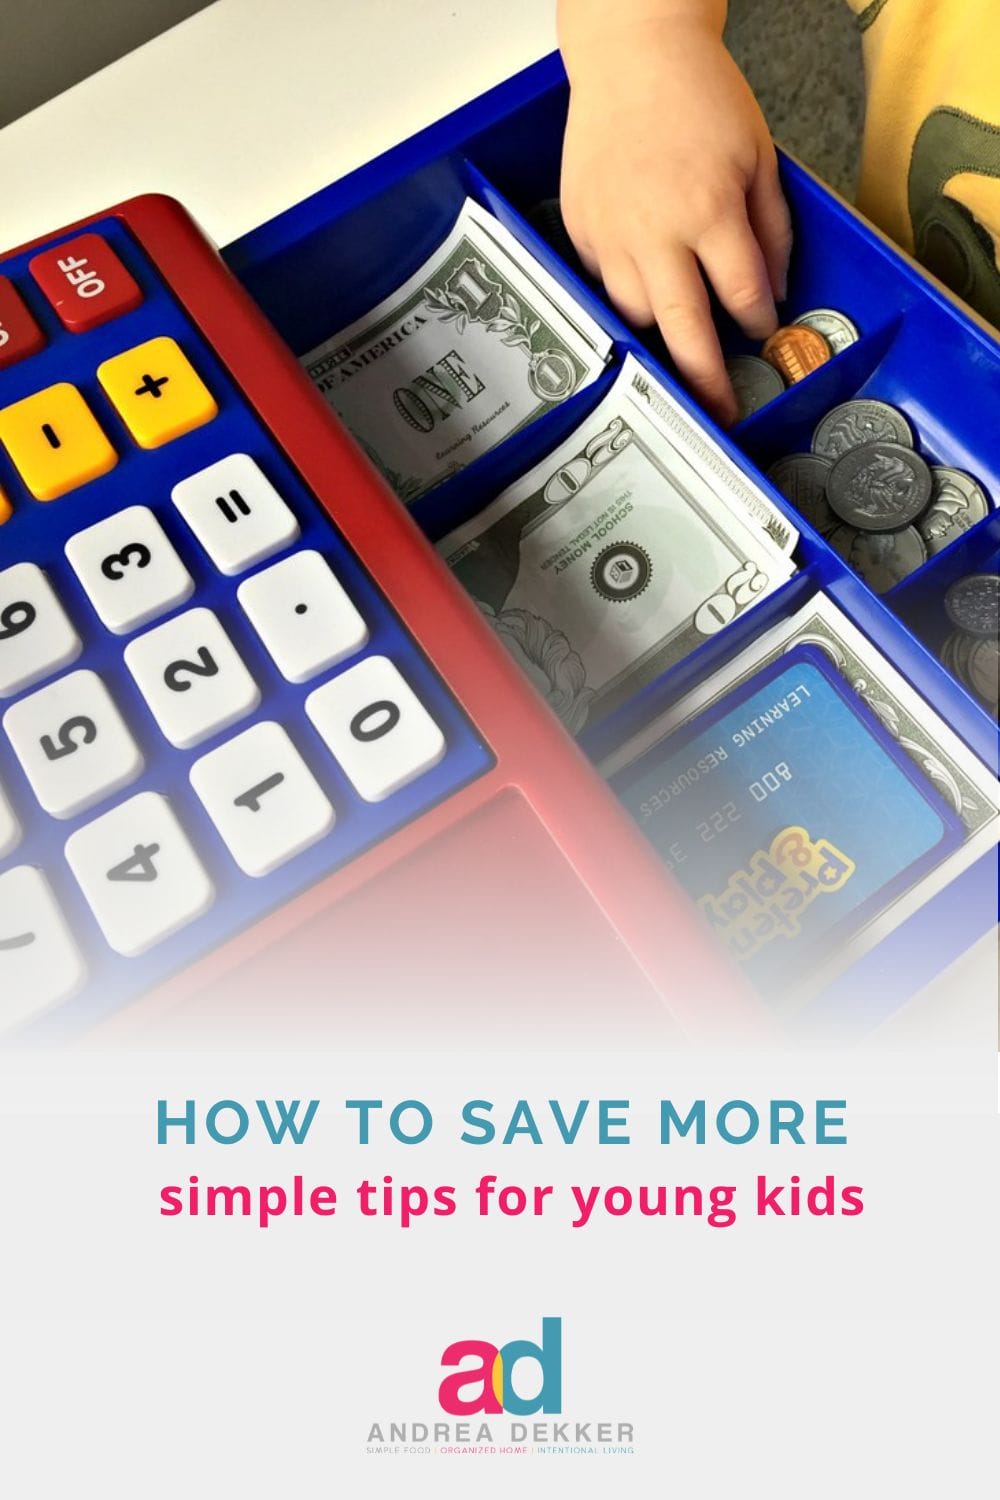 Simple concepts to help younger children think wisely about money management, give generously, and grow their savings! via @andreadekker